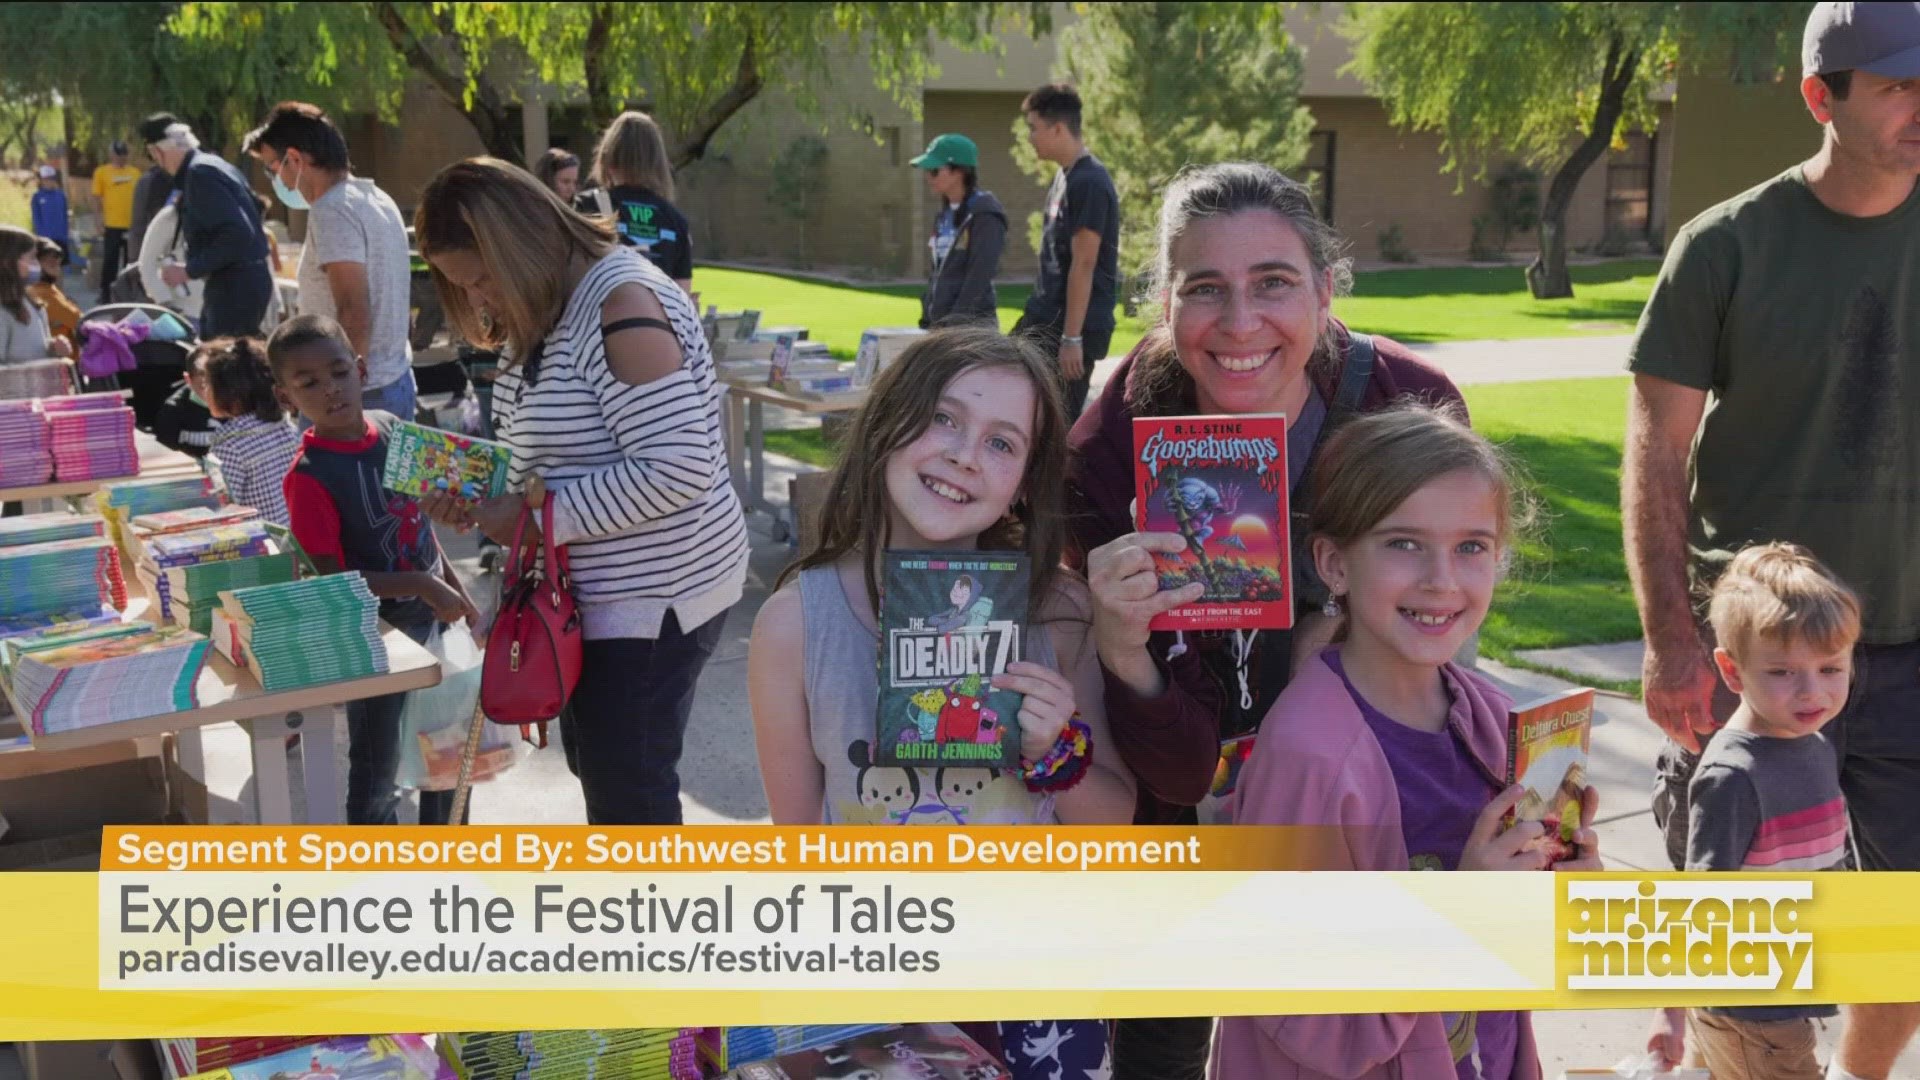 Crafts, music, food trucks and more help bring books to life for kids this Saturday at Paradise Valley Community College.